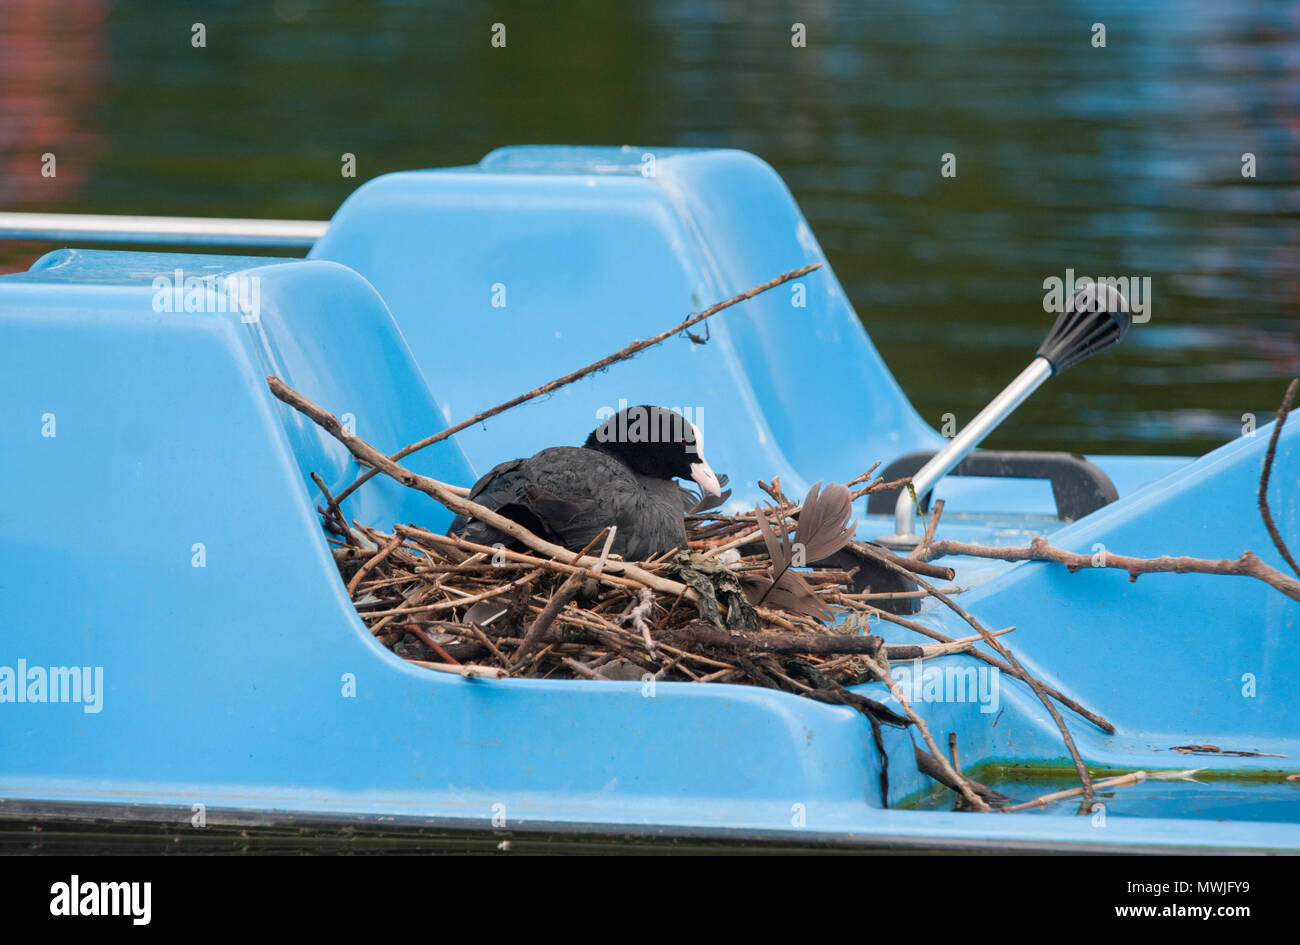 Eurasian coot, (Fulica atra), also known as the Common Coot or Coot,on nest built on a pedal boat on Regents Park lake, London, United Kingdom Stock Photo